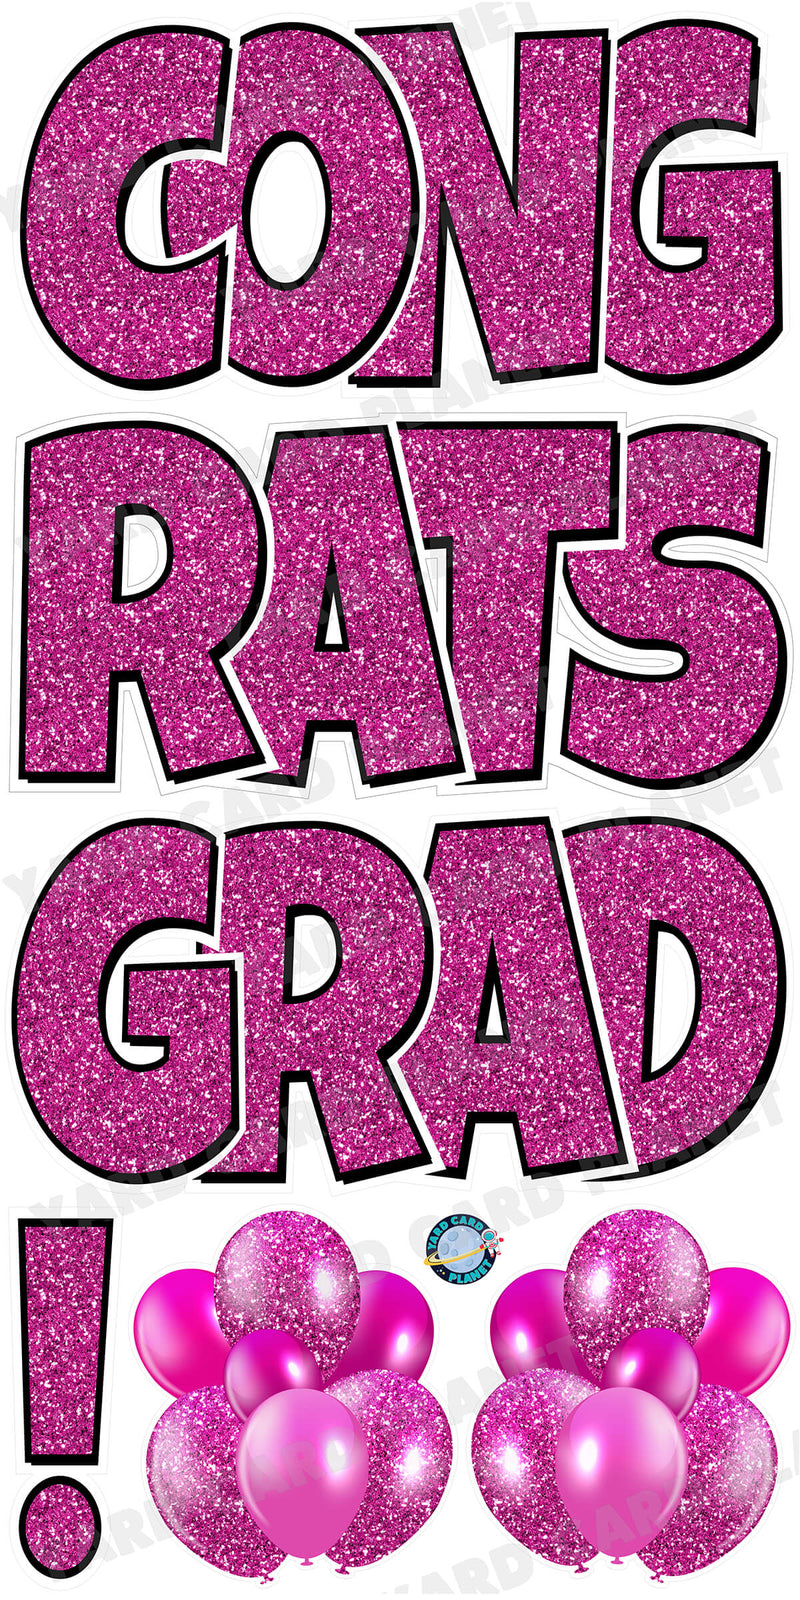 Large 23.5" Congrats Grad! Yard Card EZ Quick Sets in Luckiest Guy Font in Glitter Pattern - (Available in Multiple Colors)